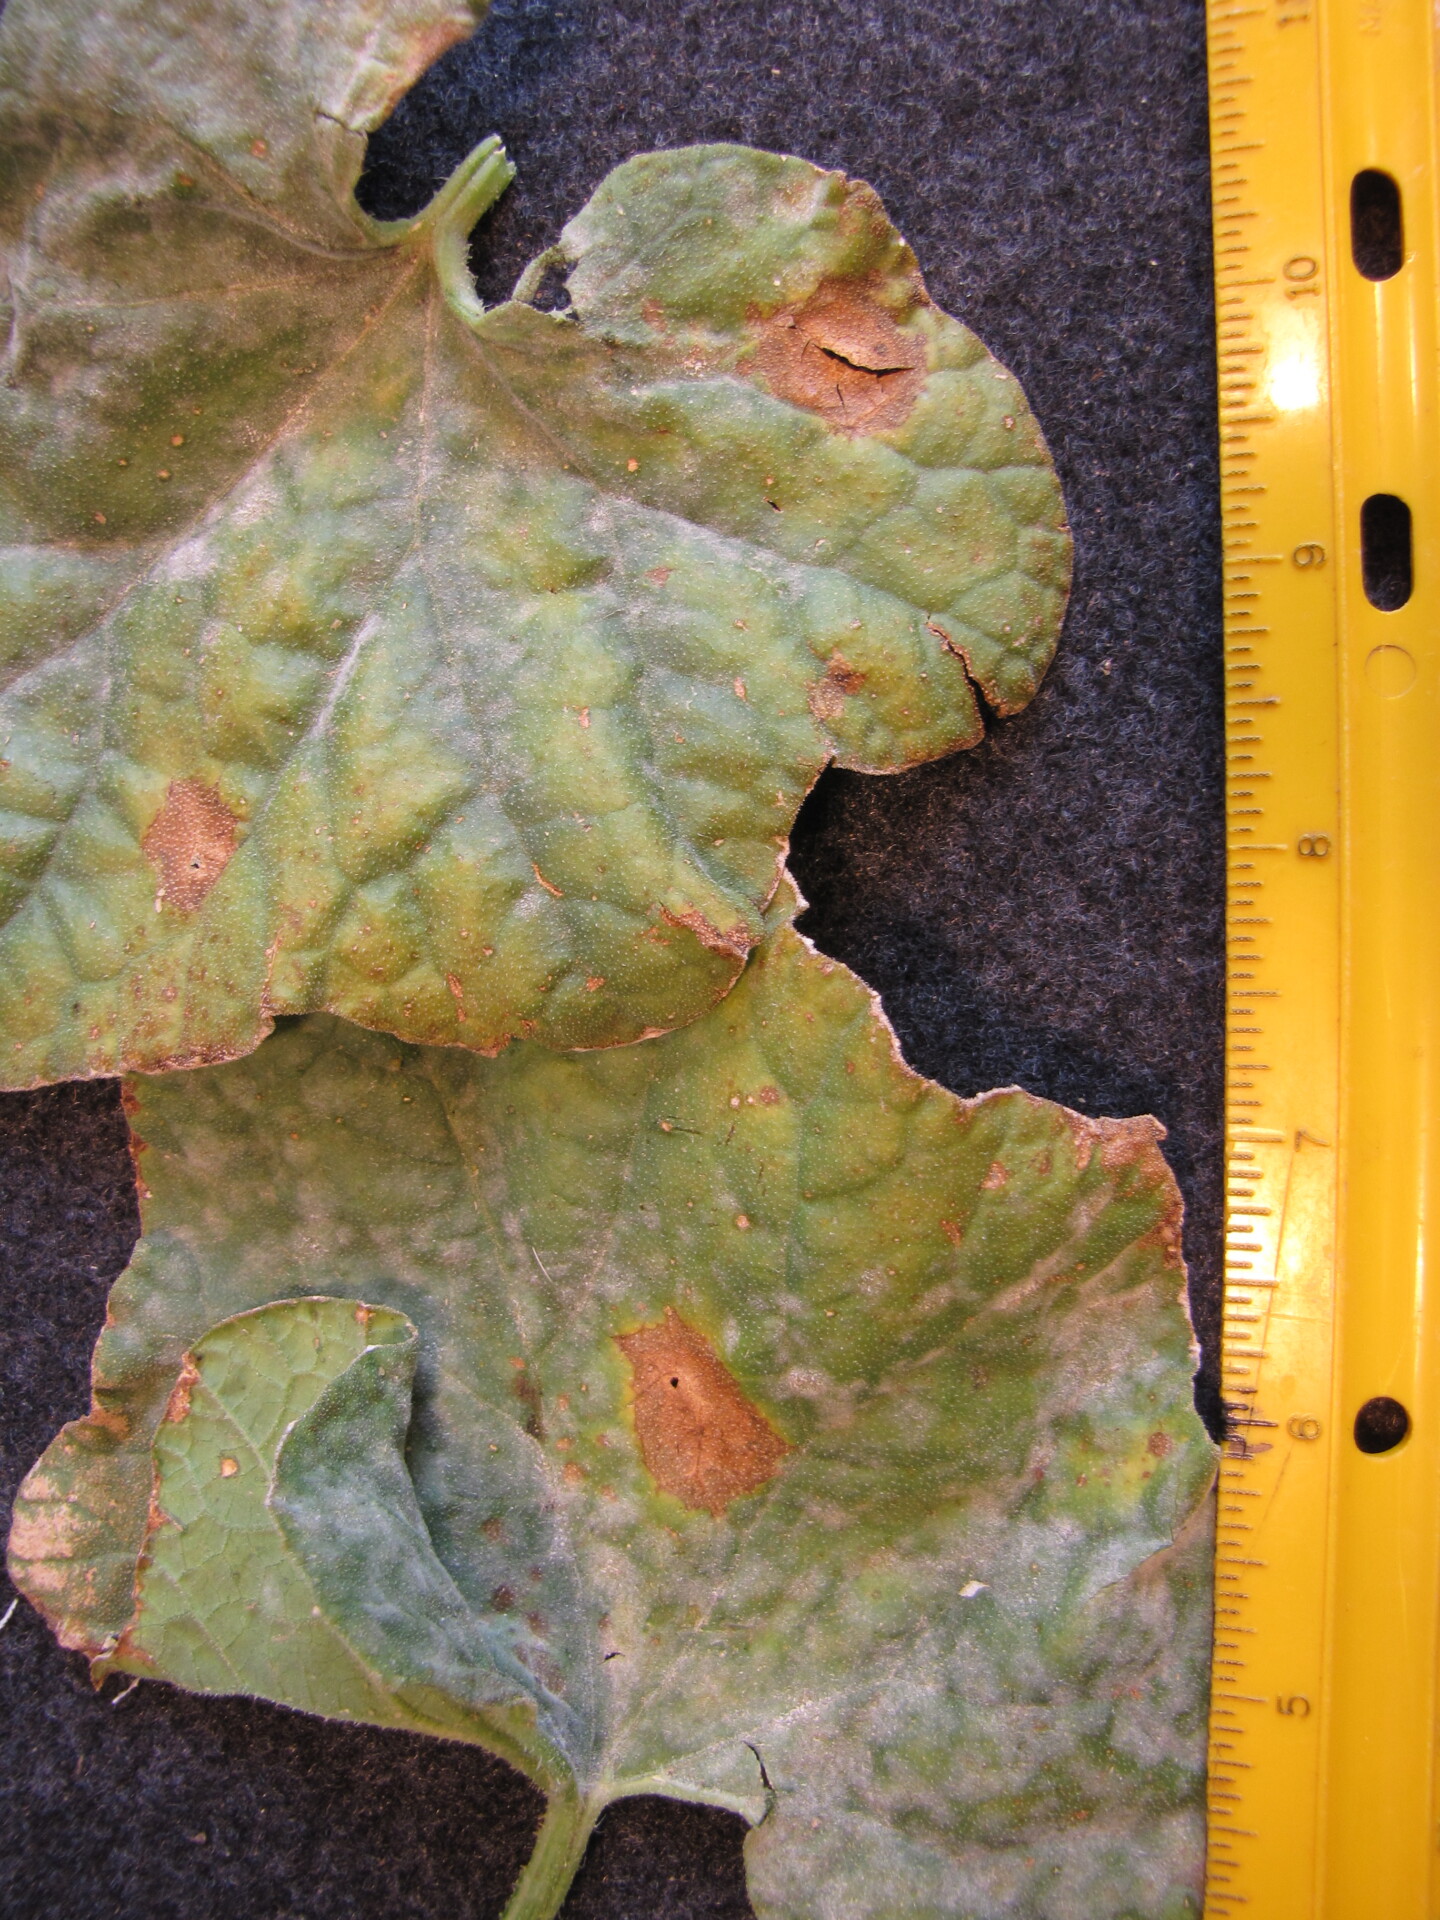 Anthracnose lesions on muskmelon